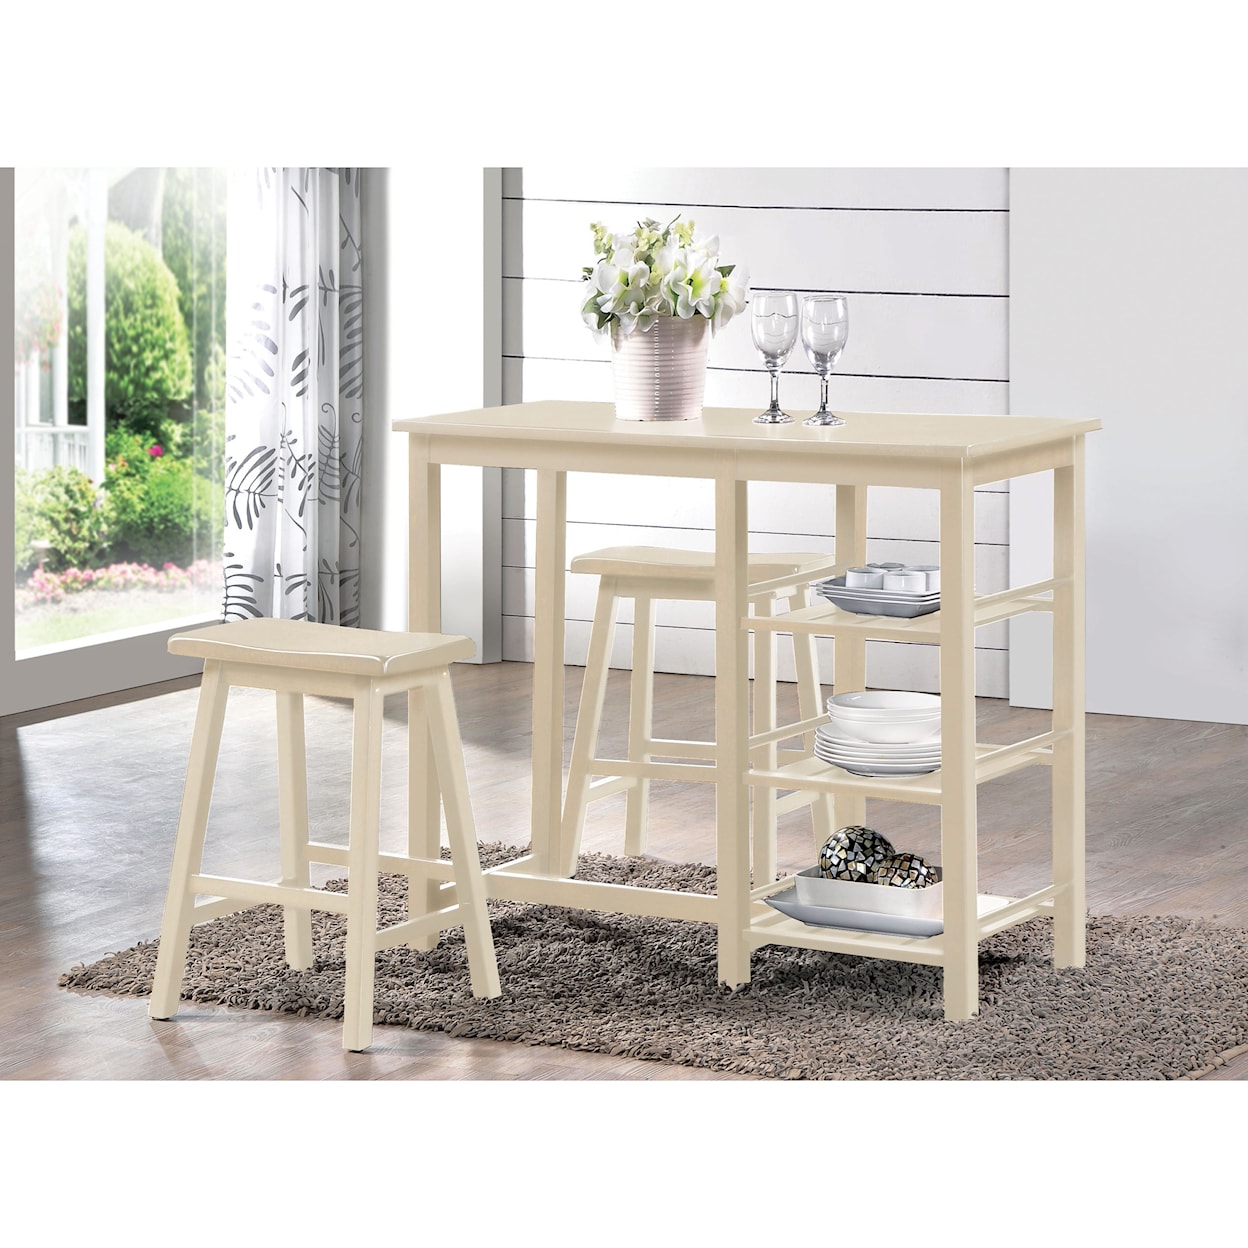 Acme Furniture Nyssa 2 Piece Counter Height Table Set